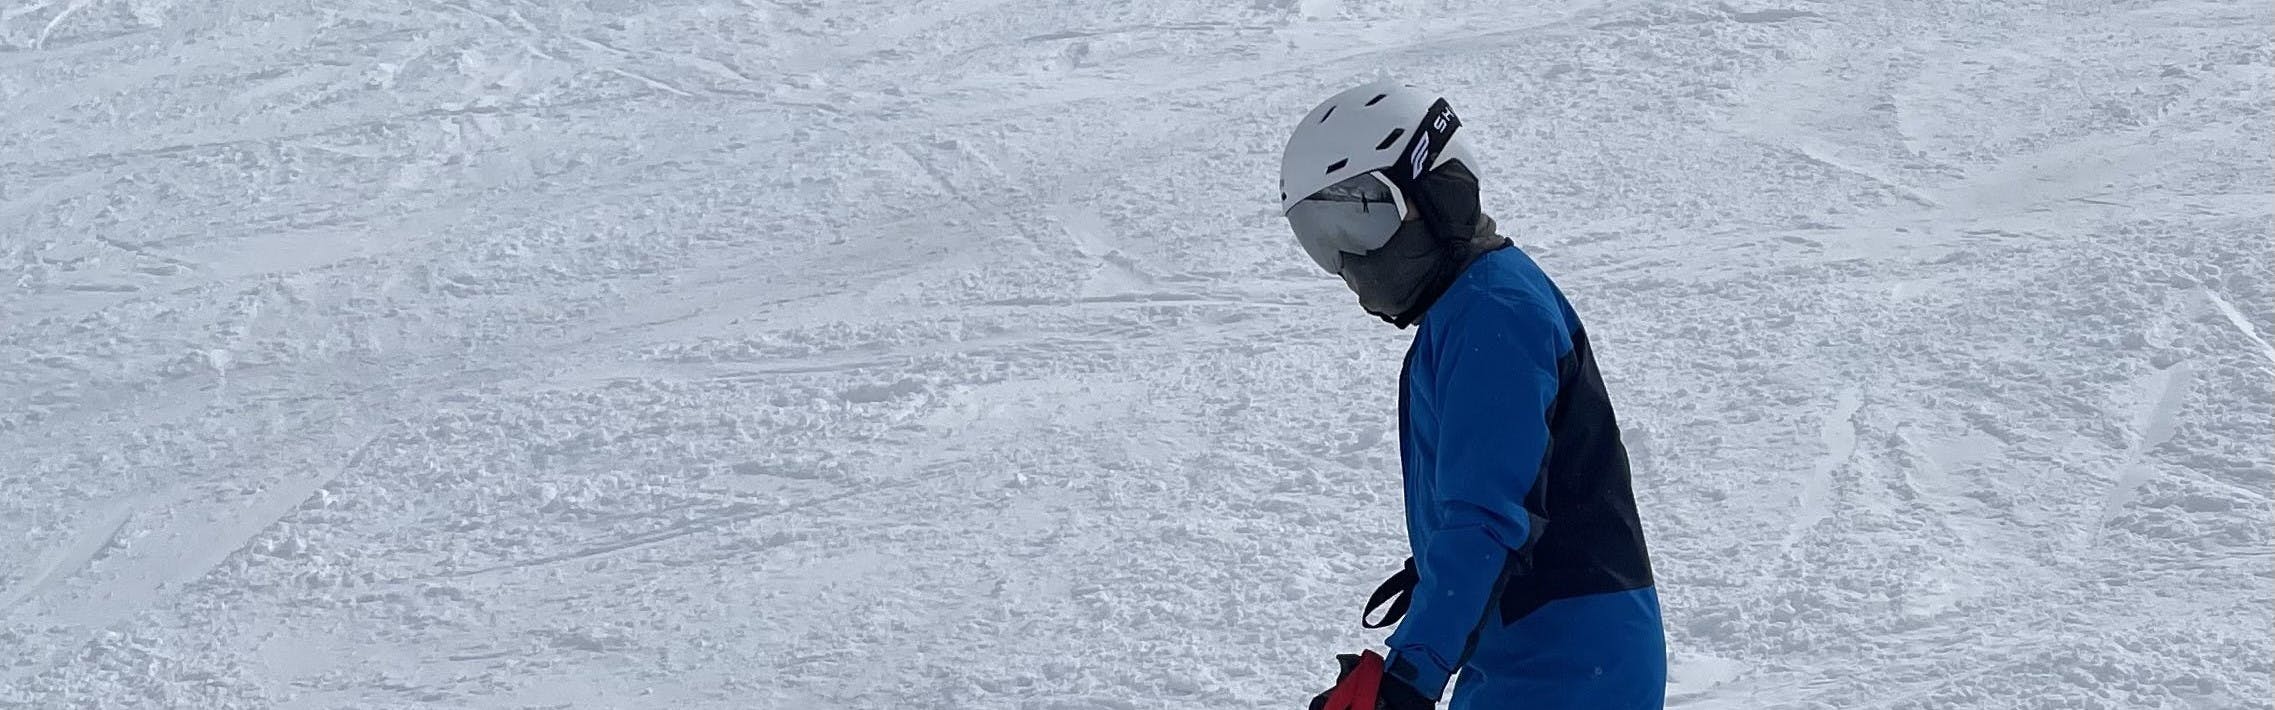 A skier in the Smith Mission MIPS helmet. 